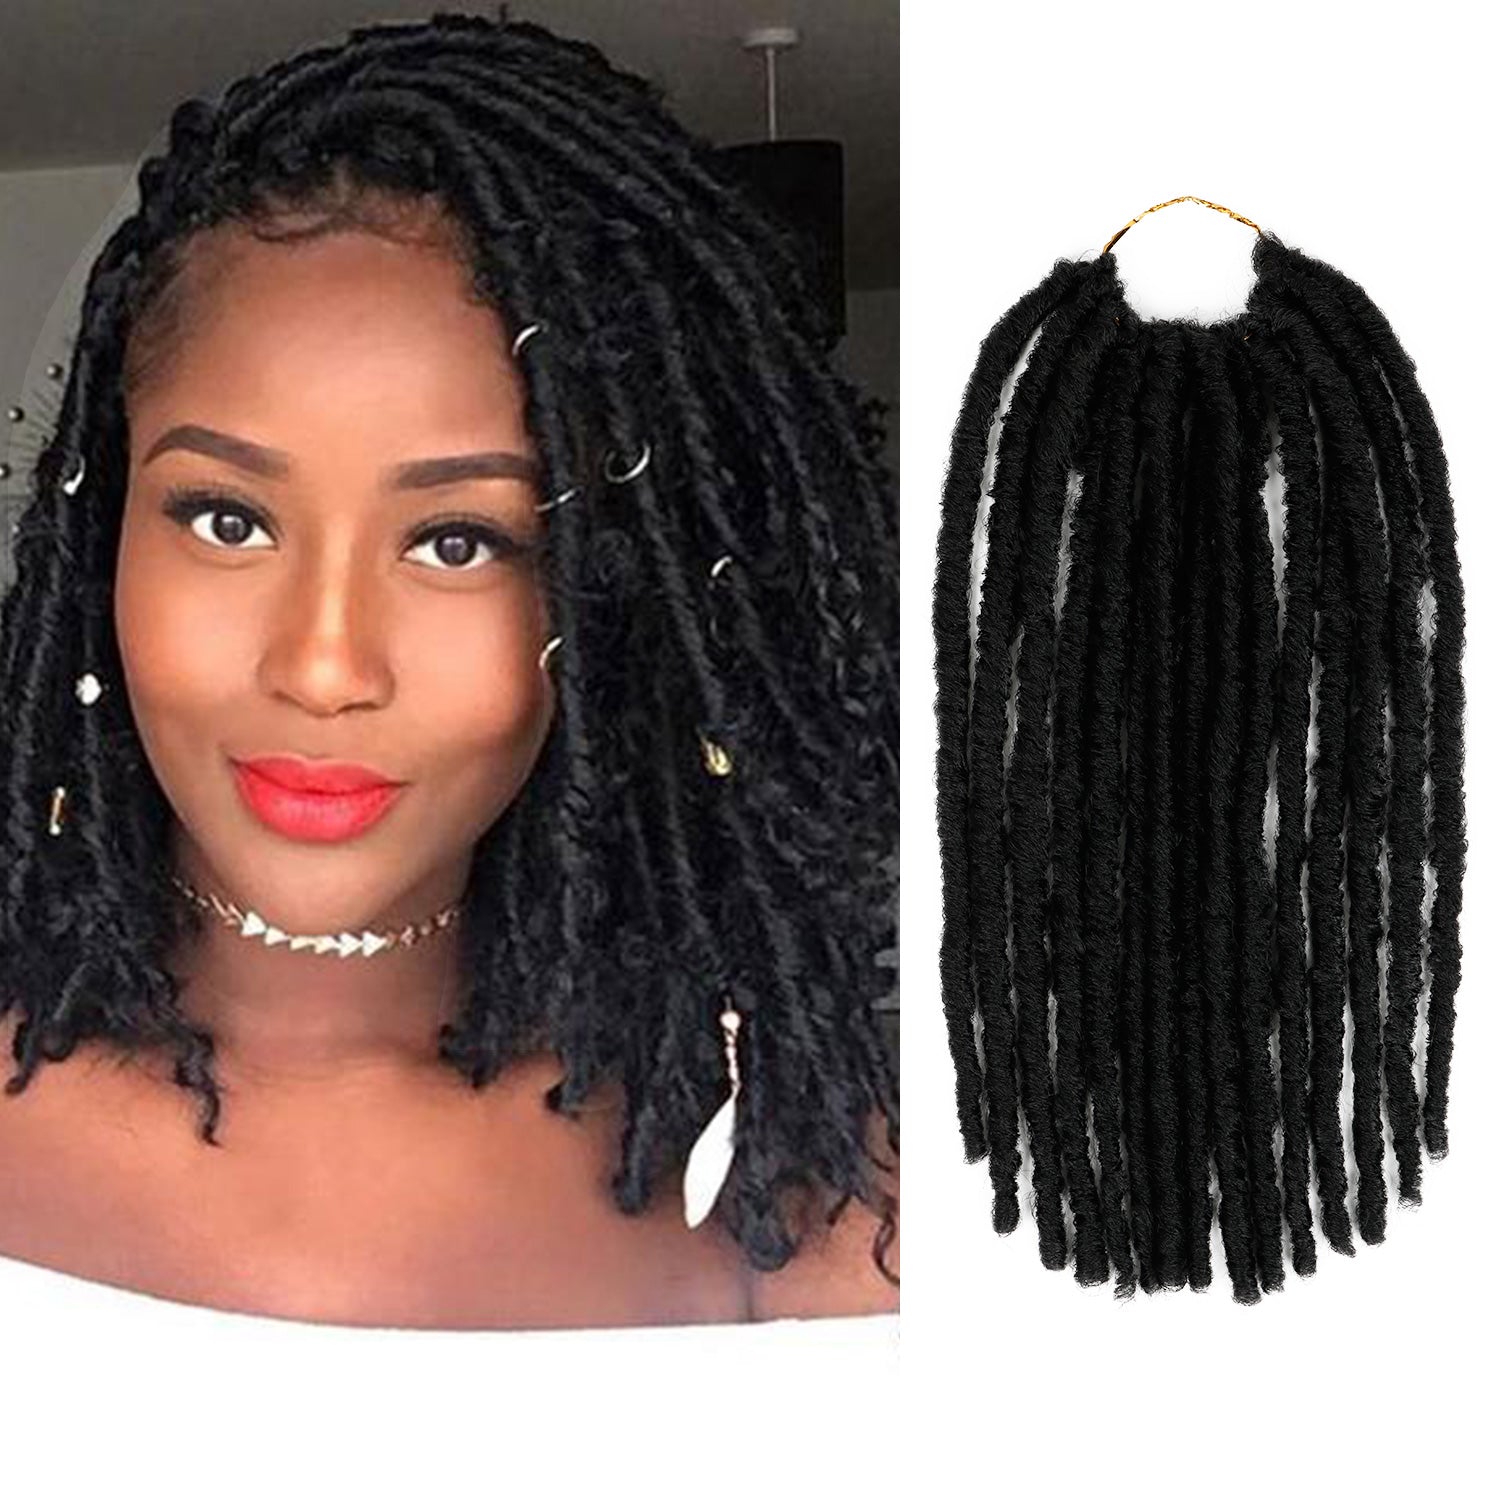 Look at these dreadlock products 🤯 #dreads #dreadlocks #locs